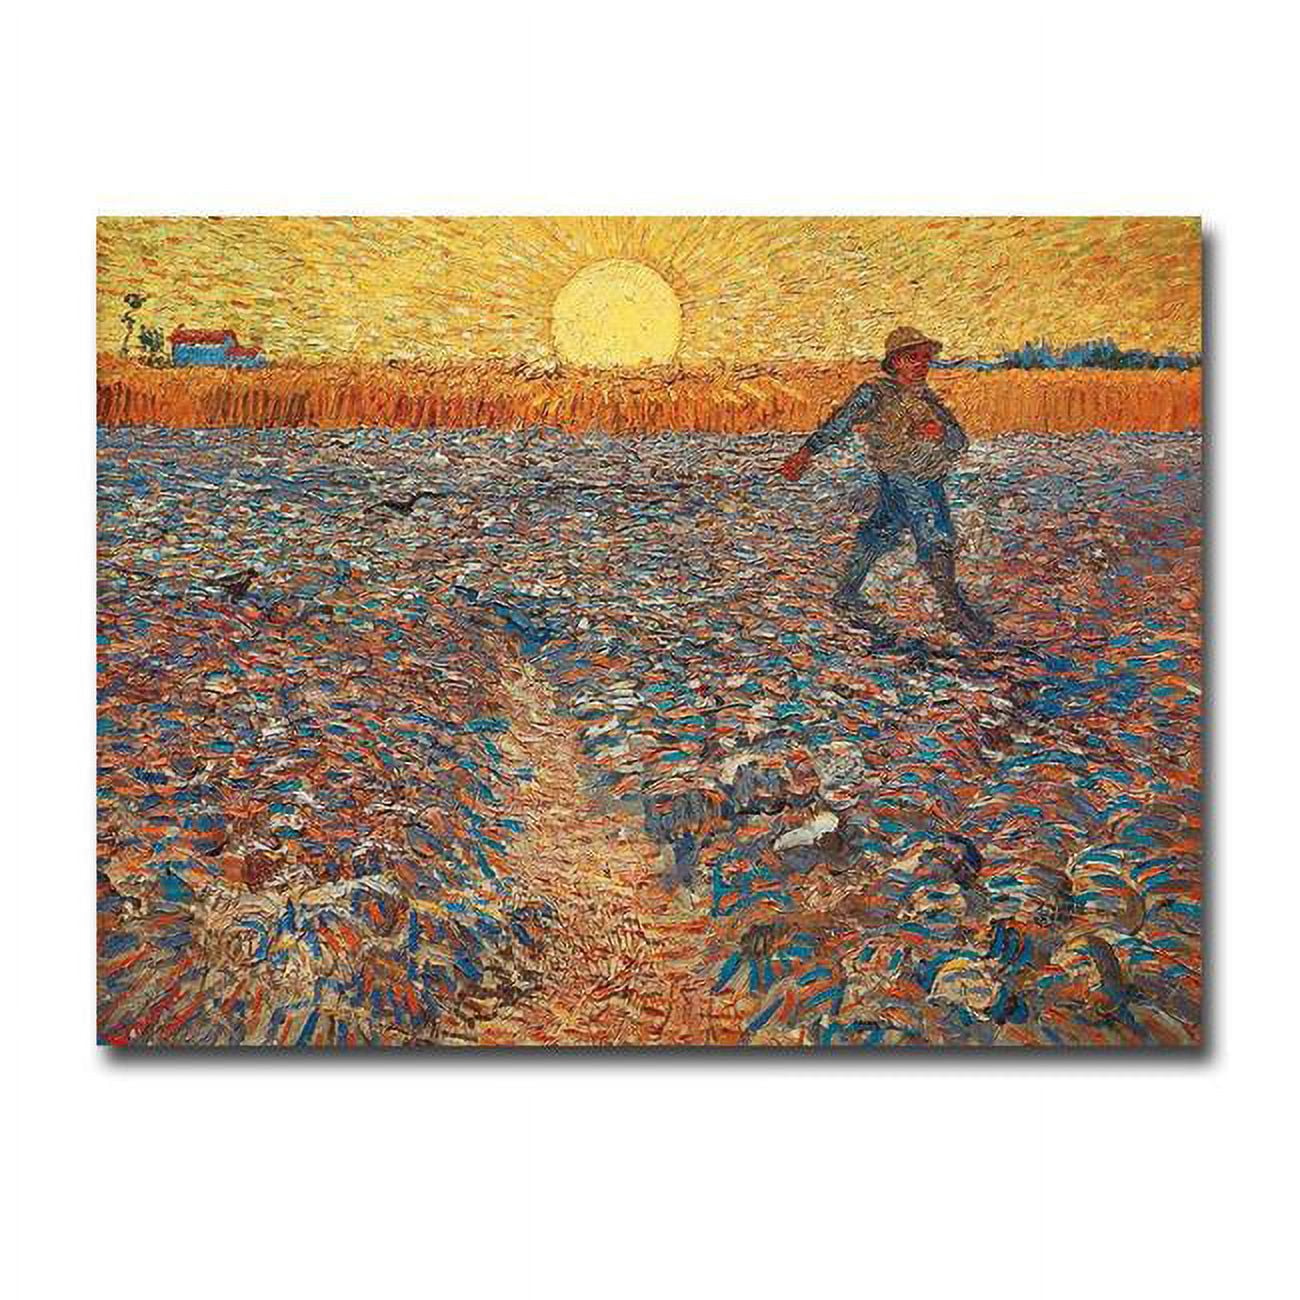 1216am557sag The Sower By Vincen Van Gogh Premium Gallery Wrapped Canvas Giclee Art - 12 X 16 X 1.5 In.